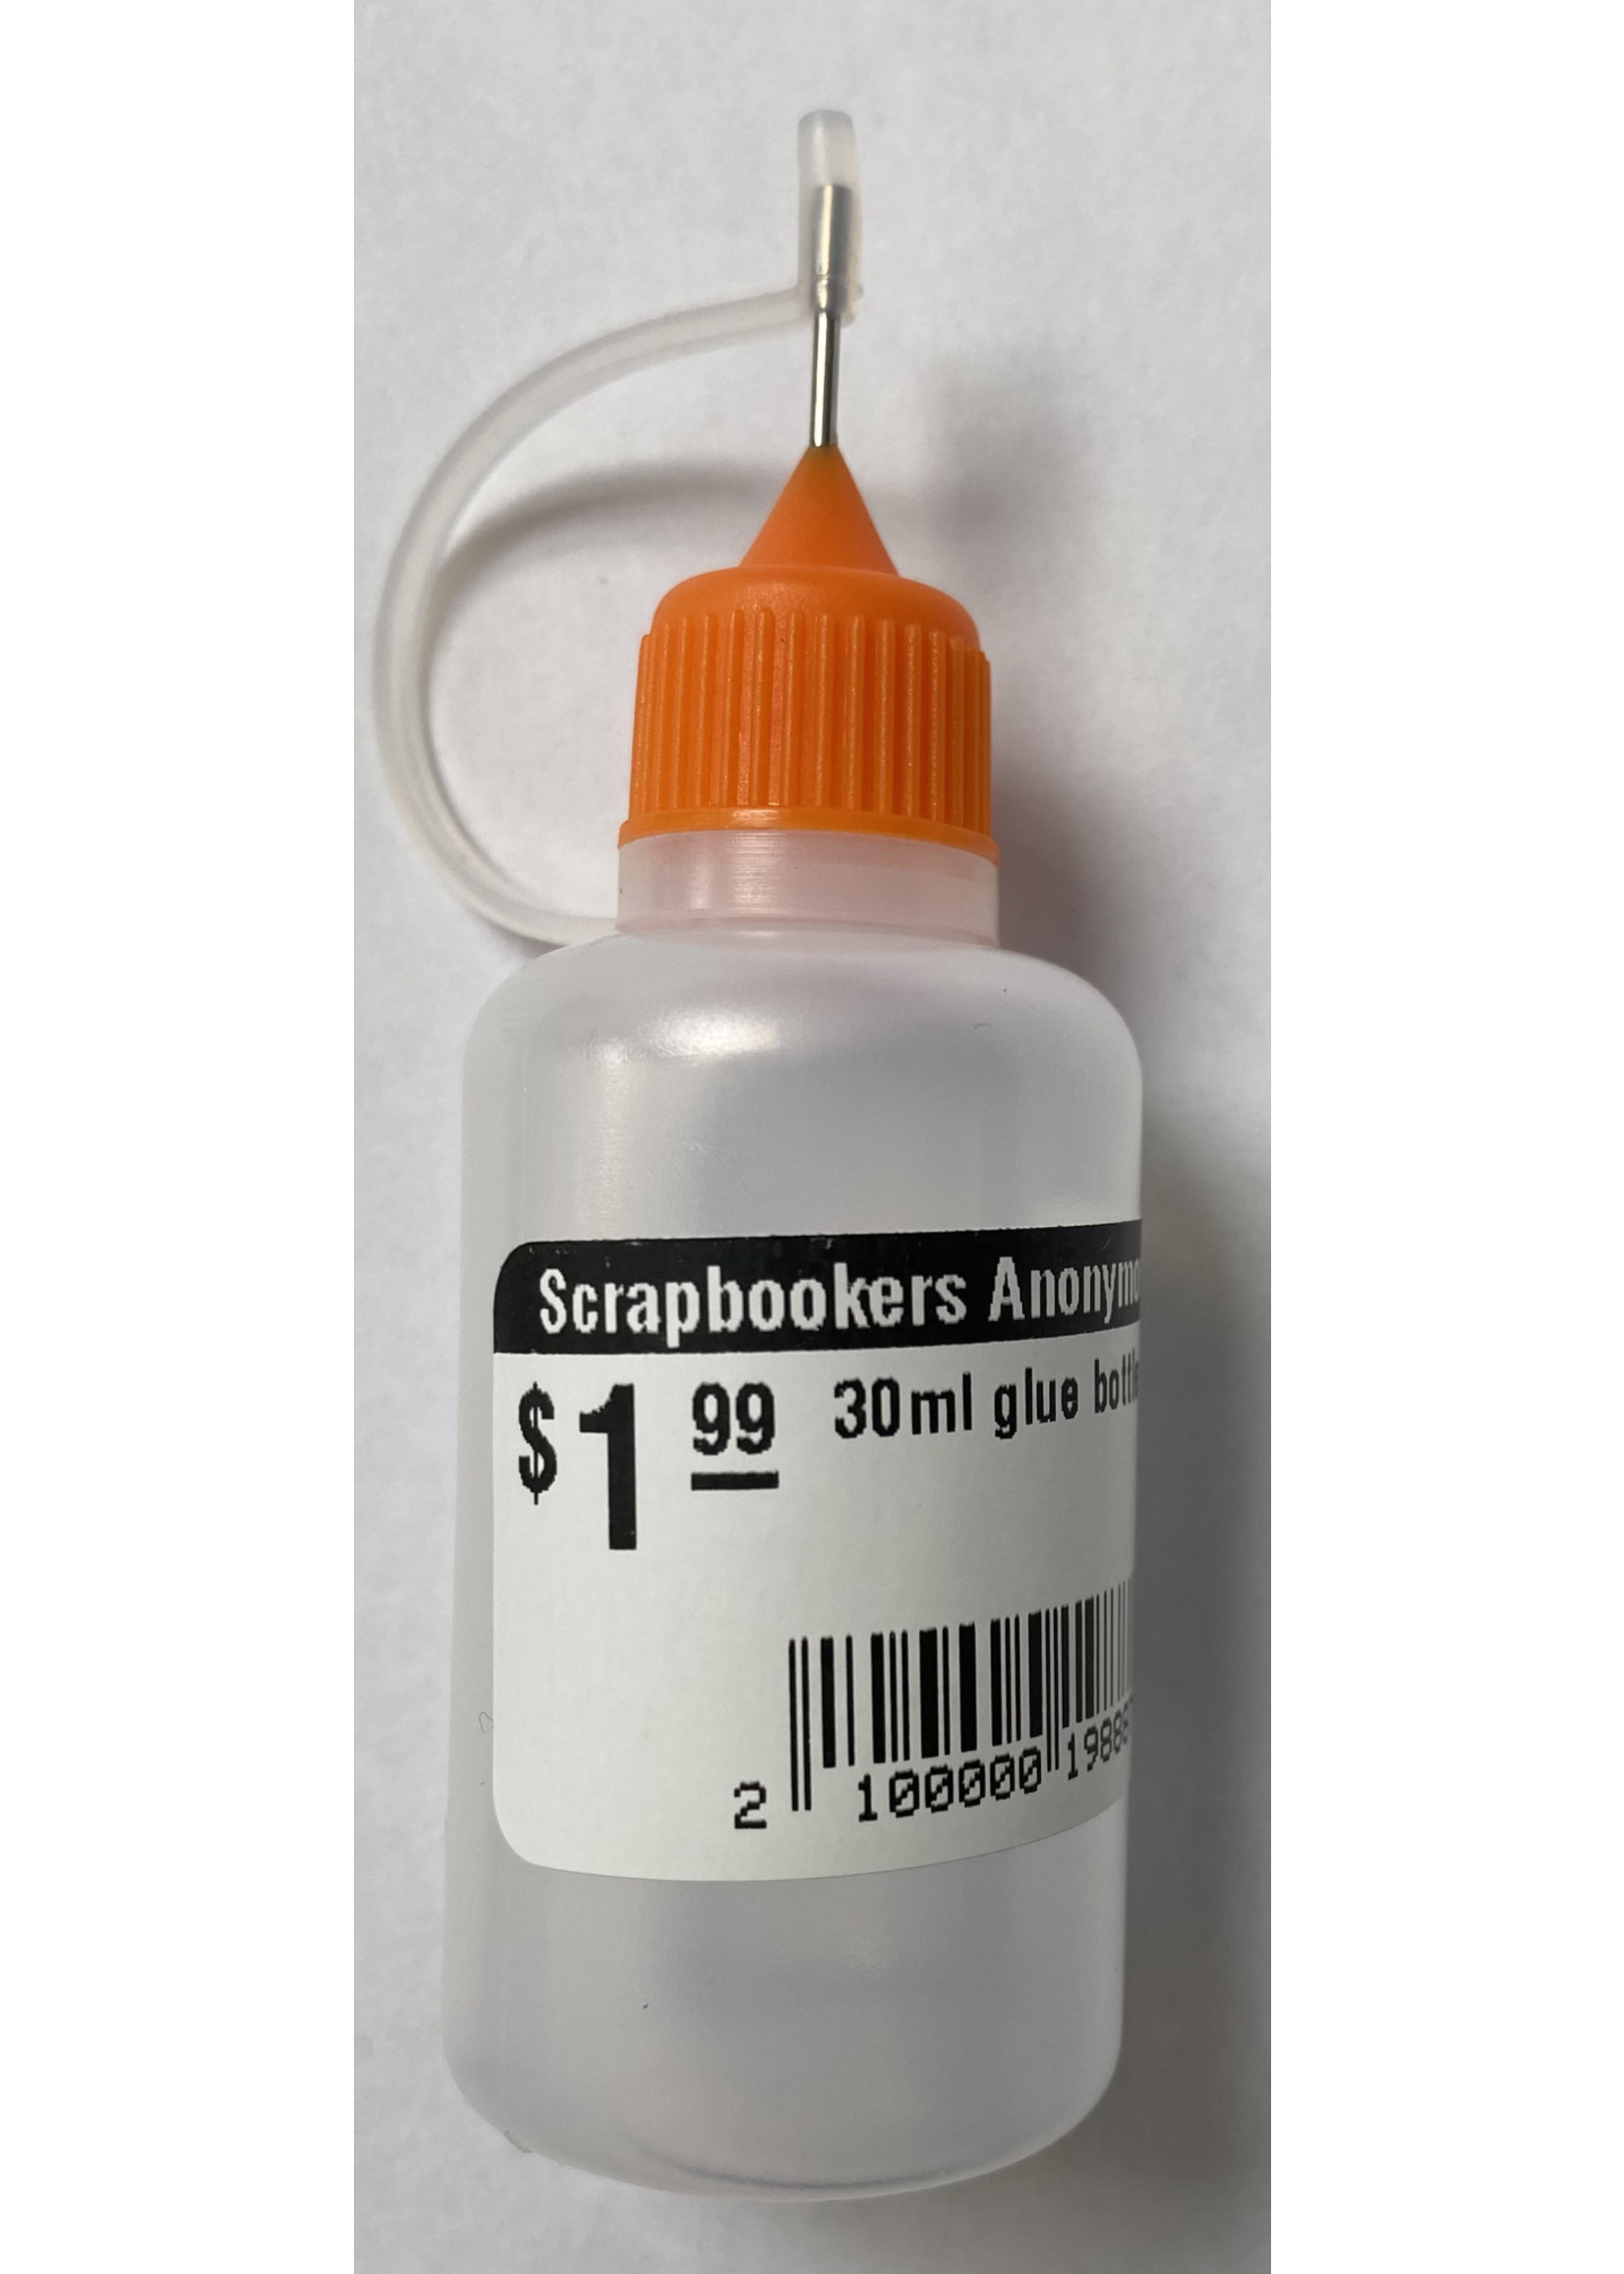 Scrapbookers Anonymous & More Glue bottle empty